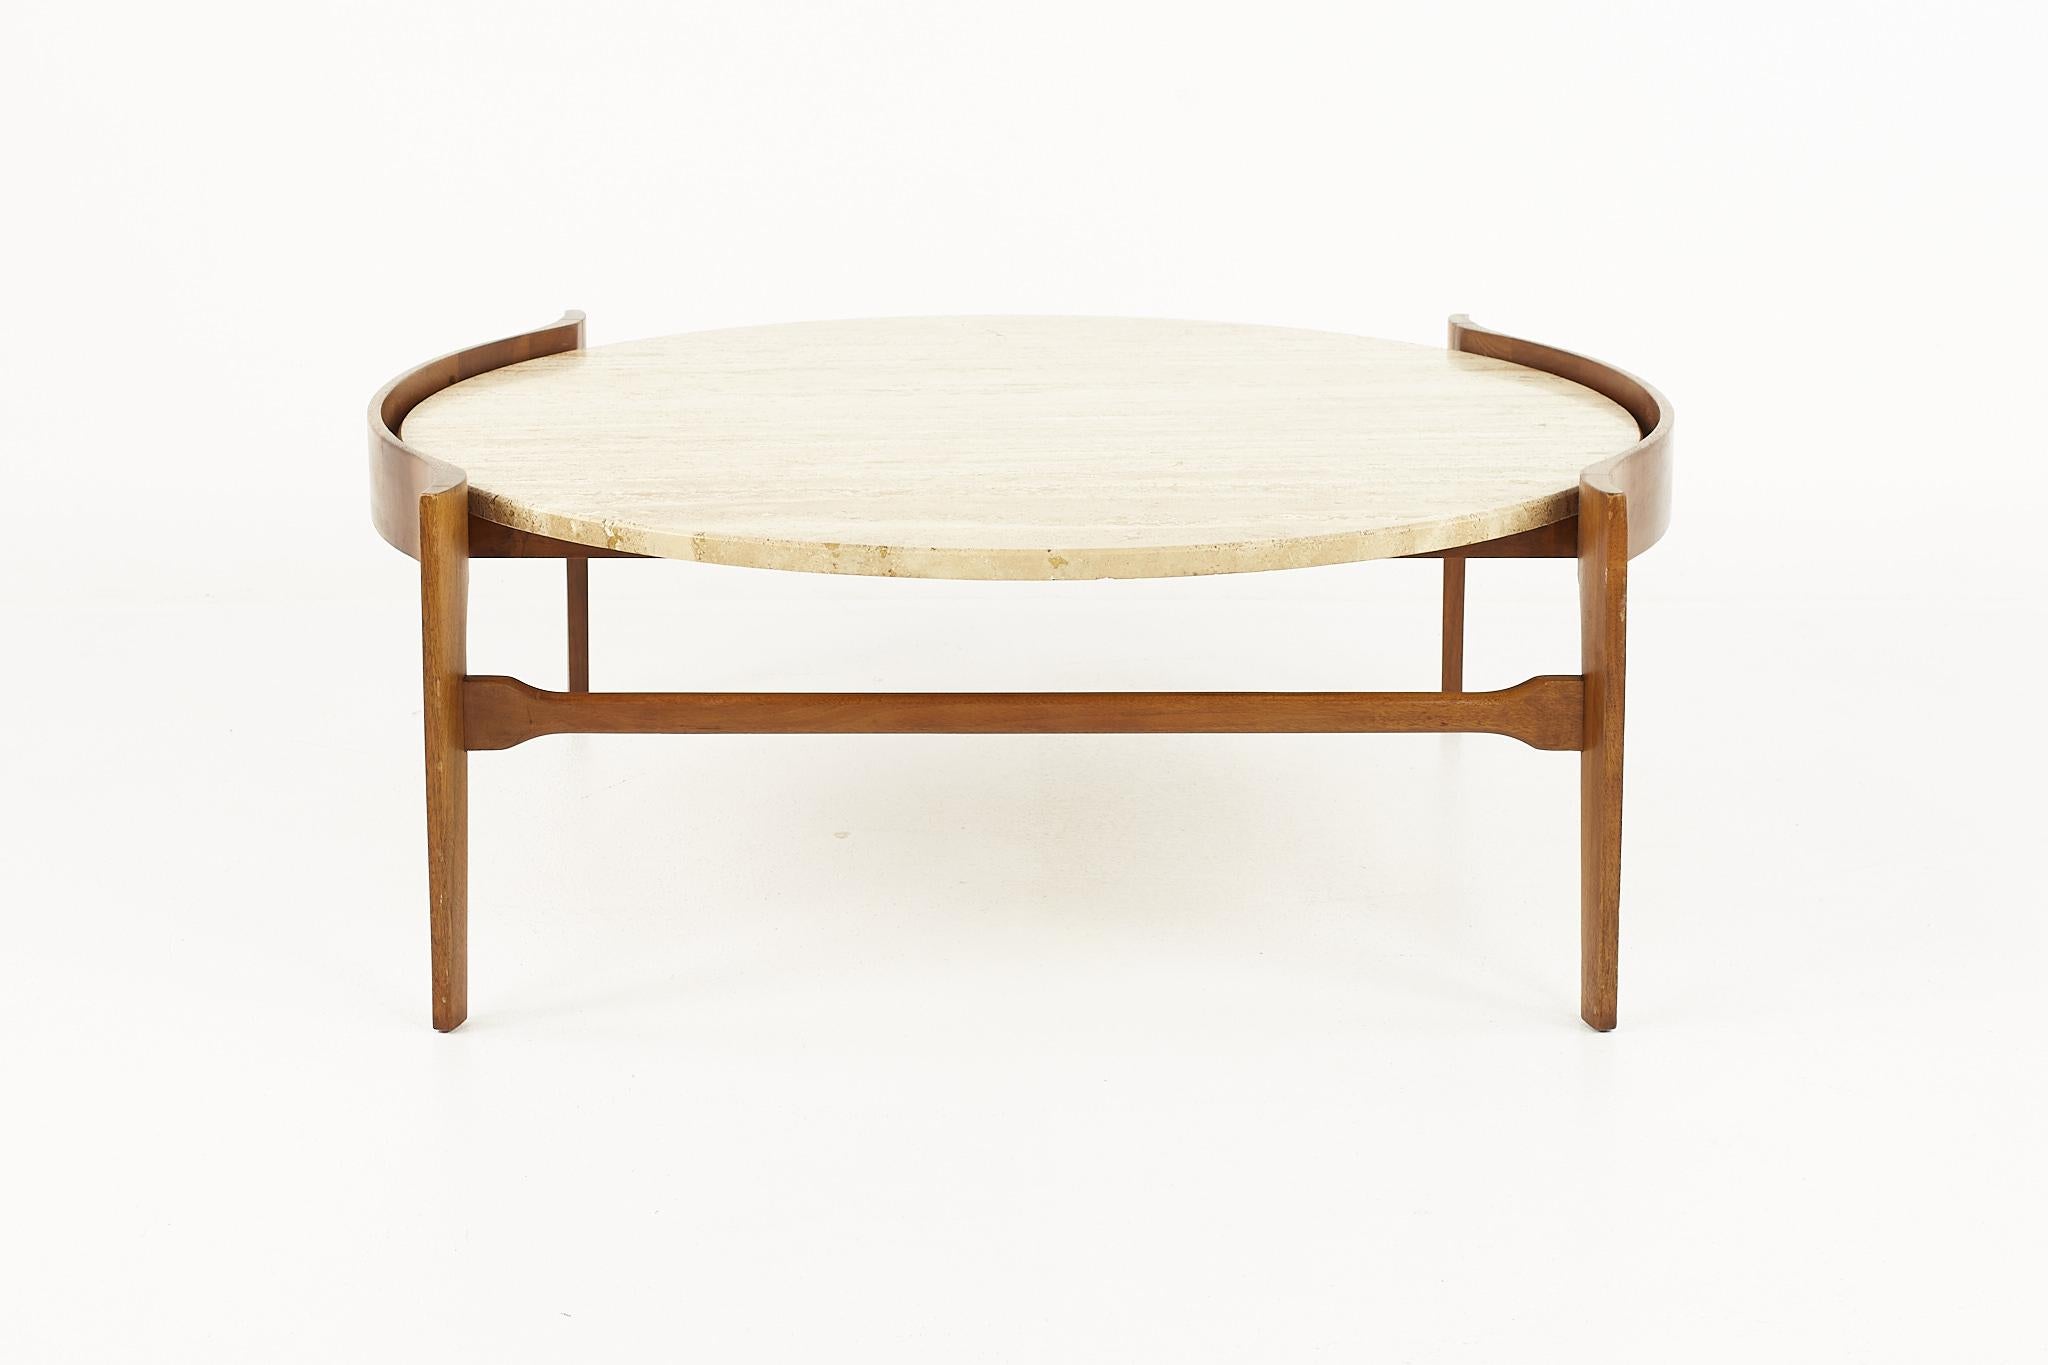 Bertha Schaefer Mid Century travertine and walnut coffee table

Coffee table measures: 40.5 wide x 38.5 deep x 15 inches high

All pieces of furniture can be had in what we call restored vintage condition. That means the piece is restored upon